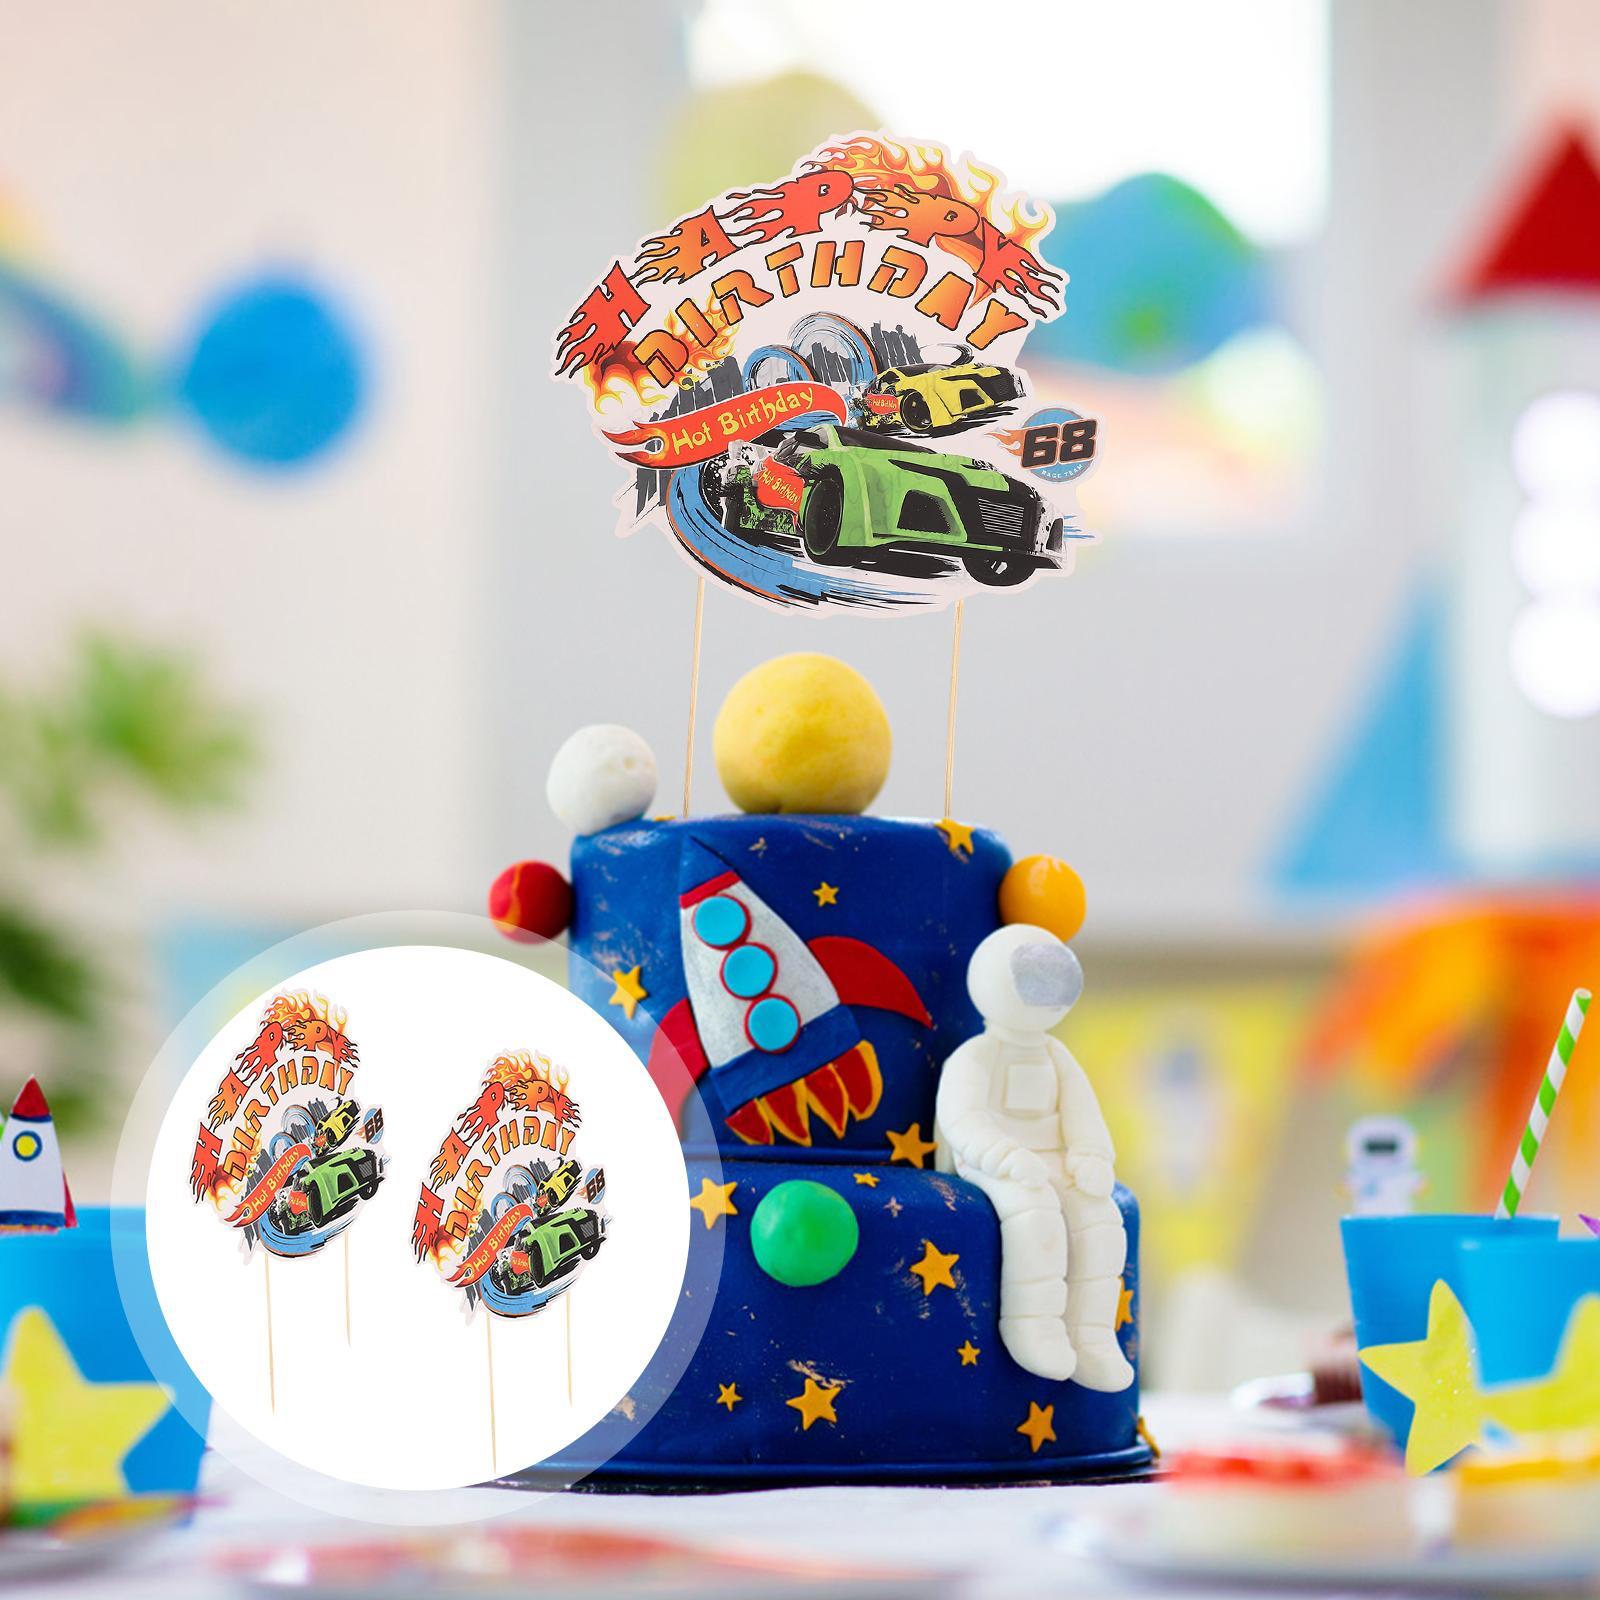 2 Pcs Balloon Decor Happy Birthday Decorations Boys Cake Toddler Racing Car Flags Decorate Child